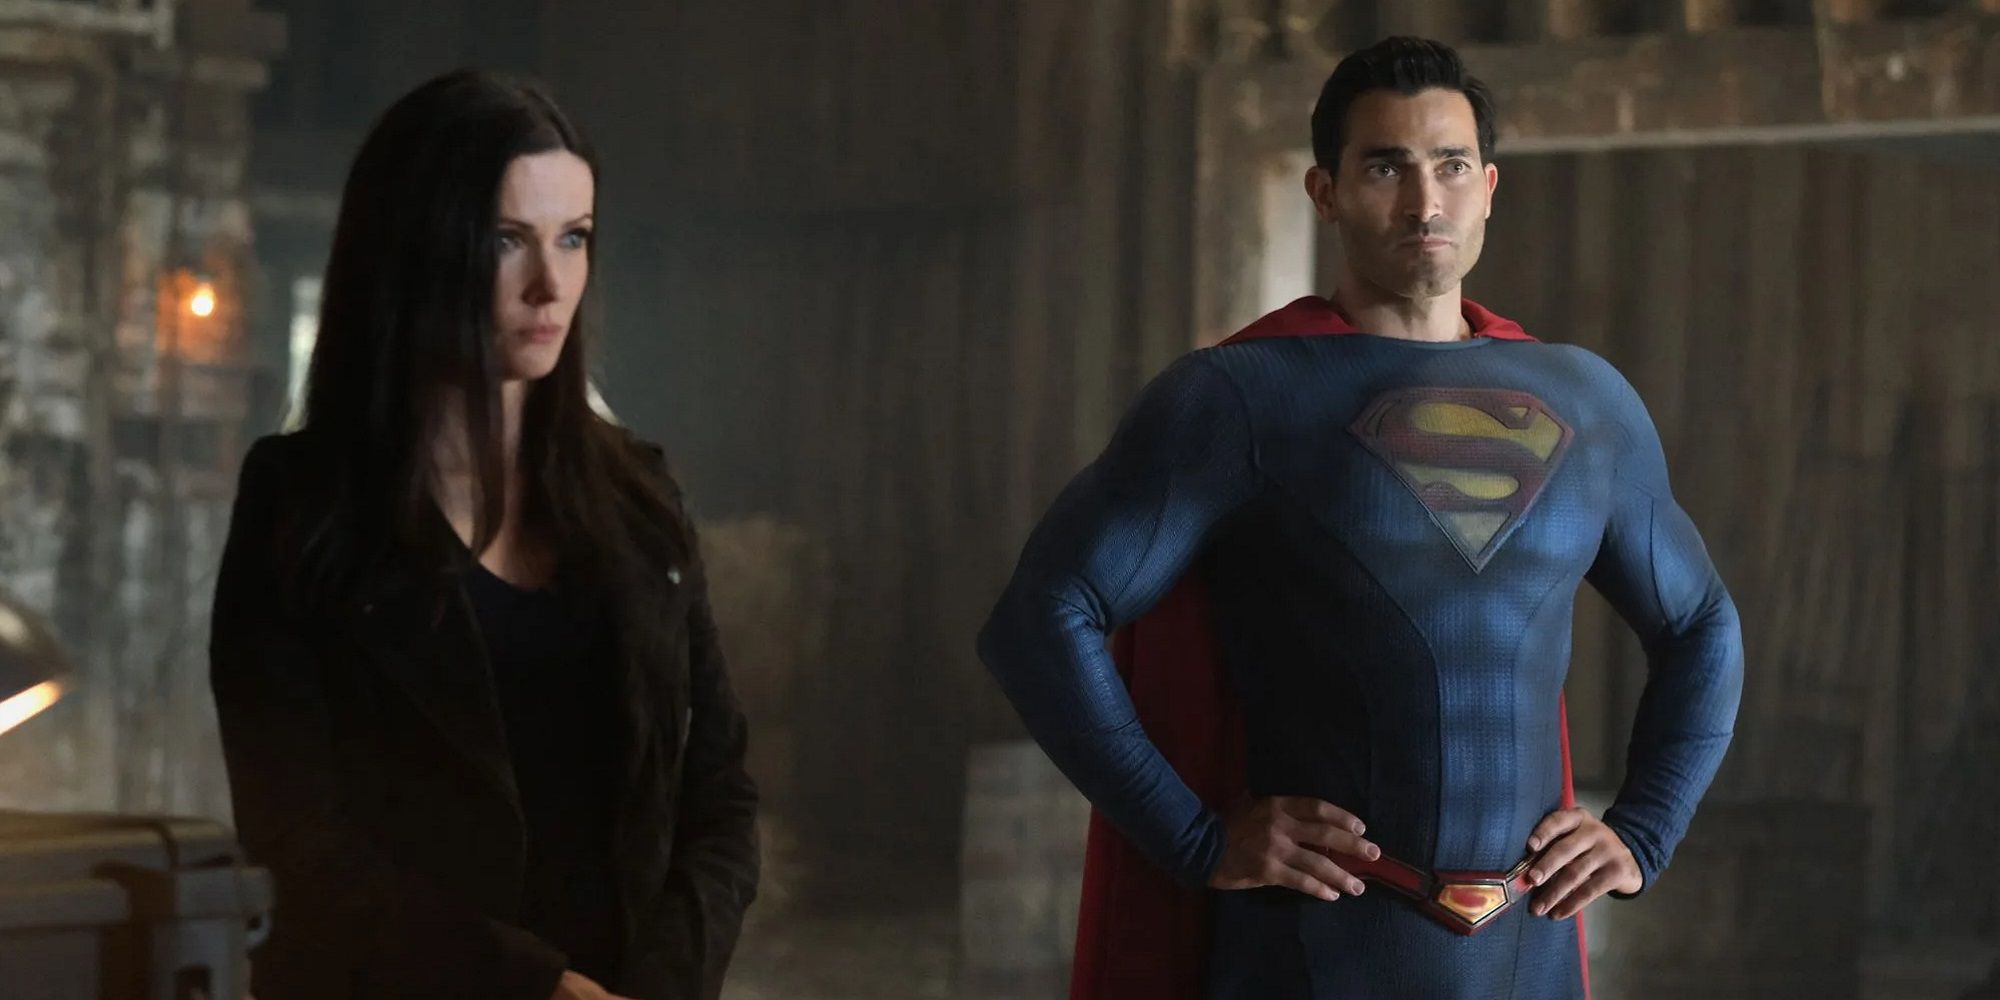 Tyler Hoechlin and Elizabeth Tulloch as Superman and Lois Lane in the CW Arrowverse series Superman And Lois